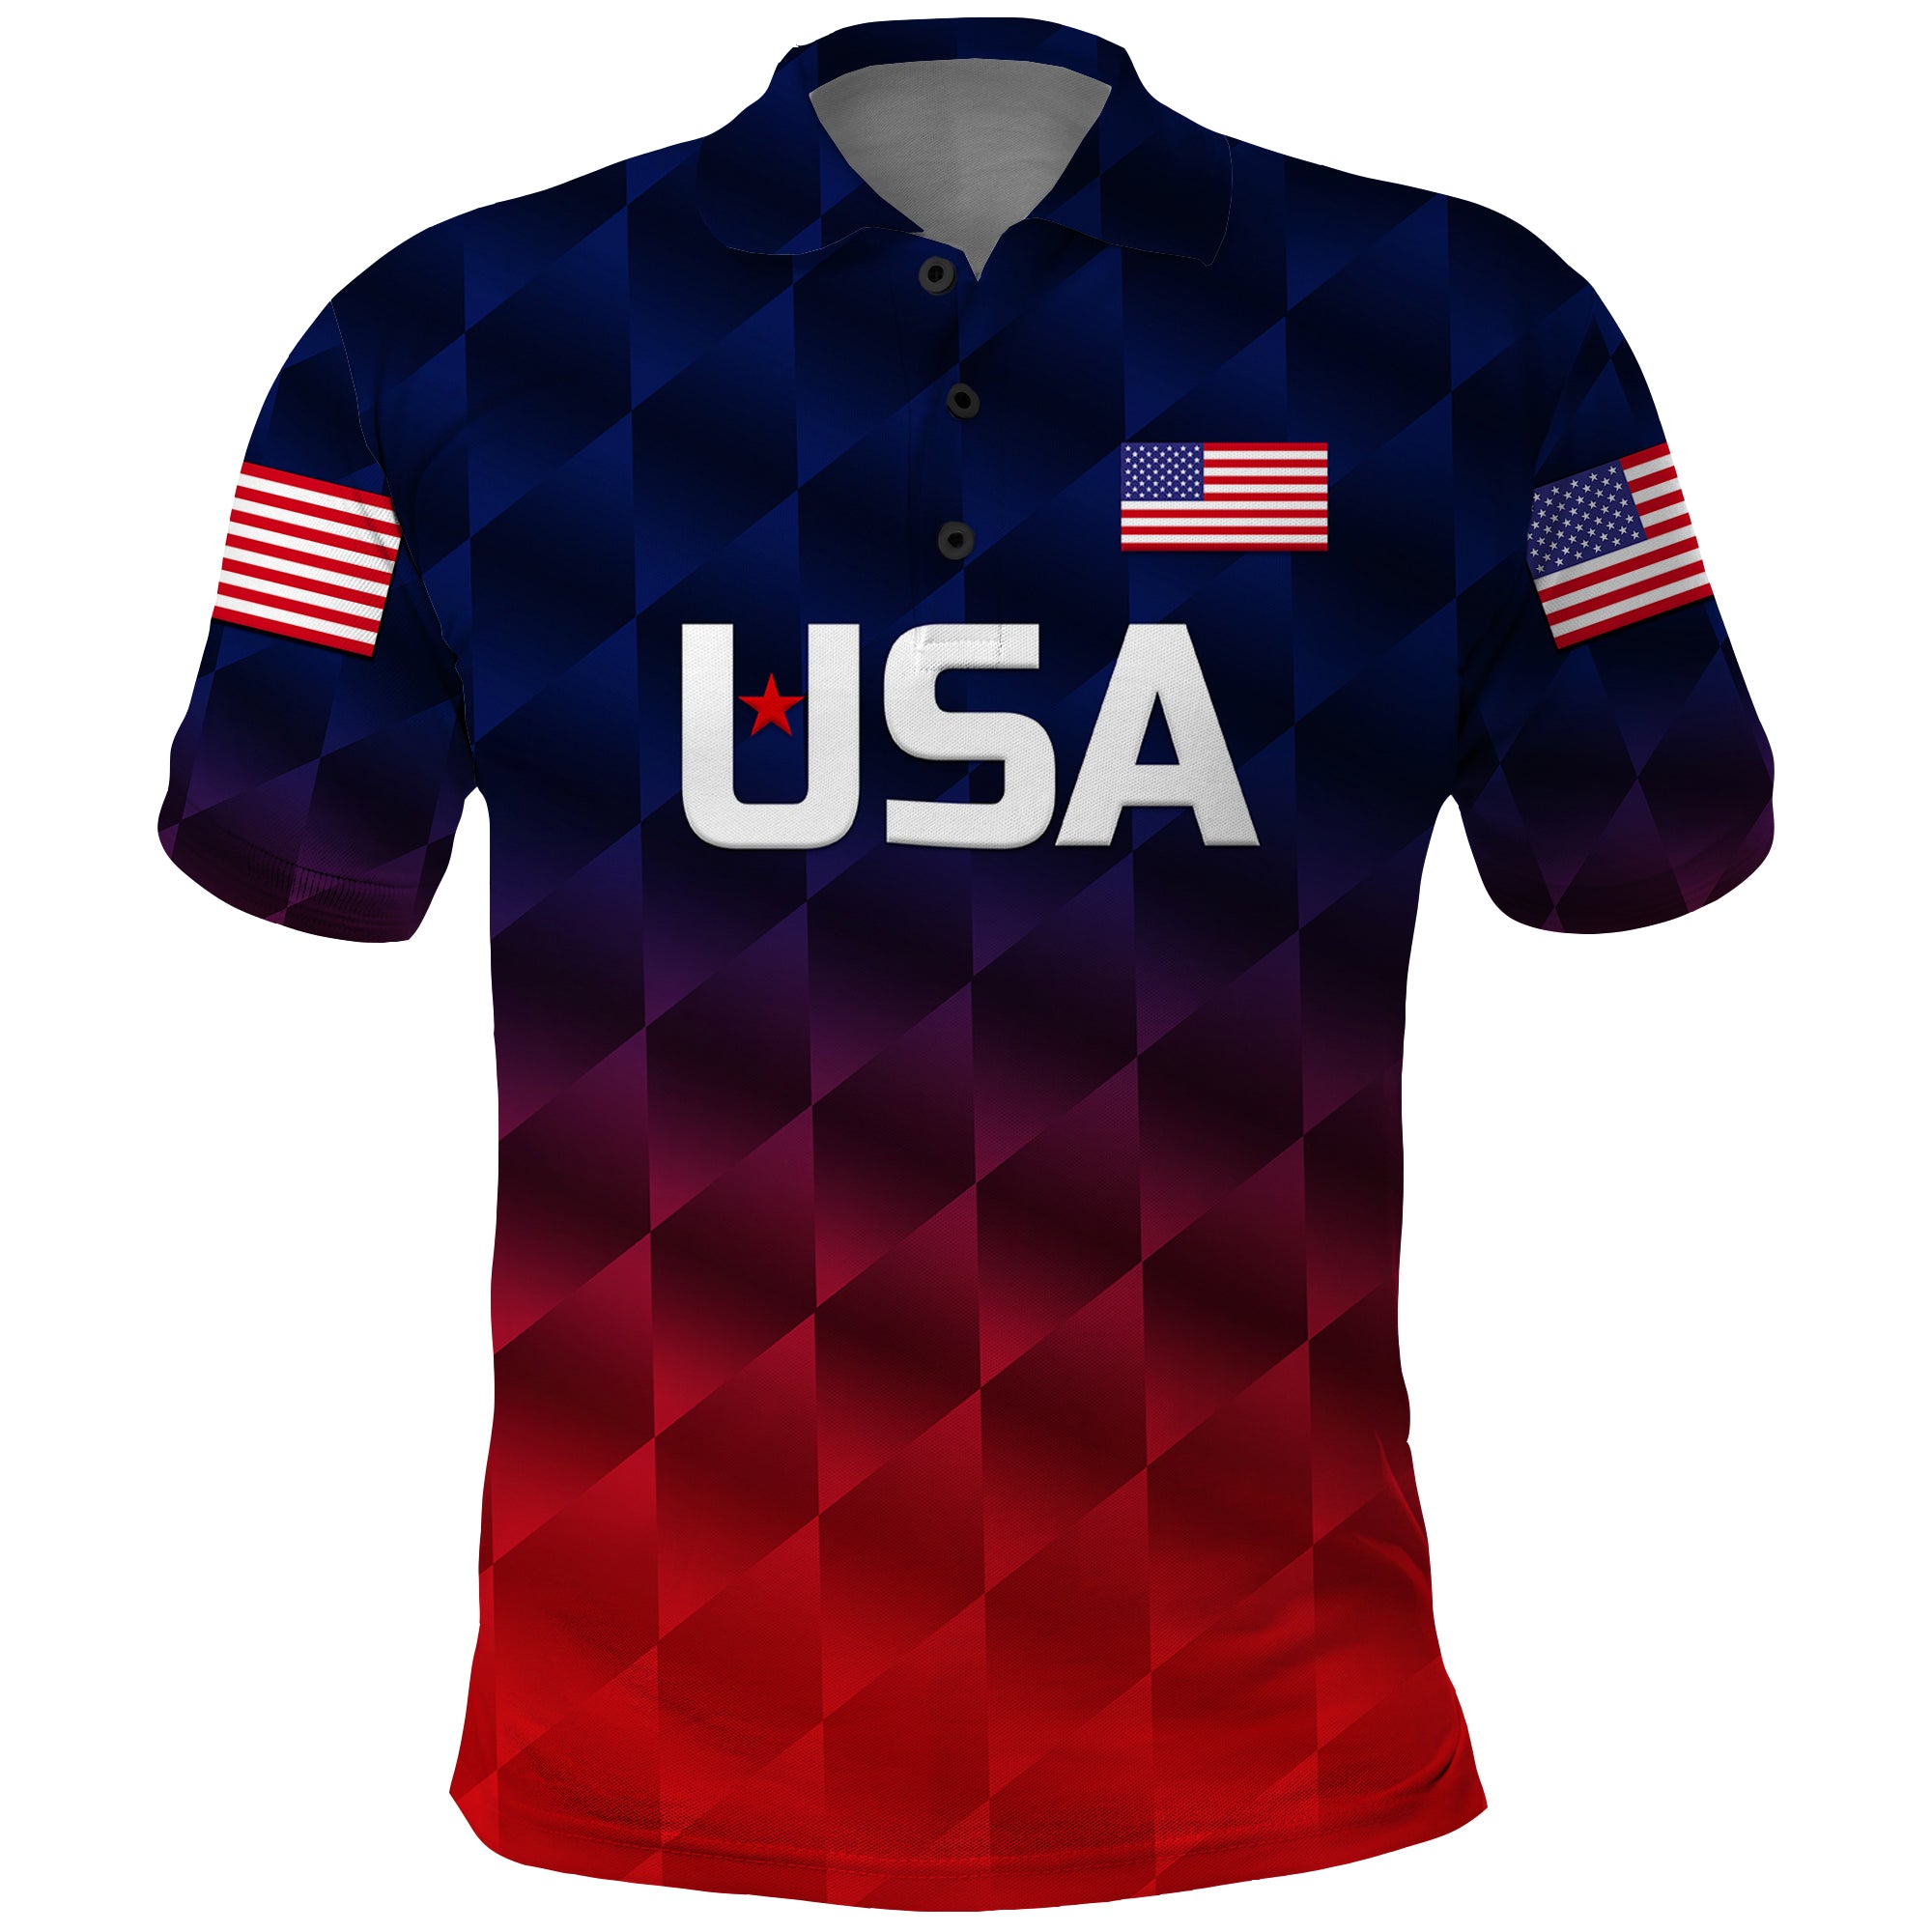 custom-personalised-united-states-national-cricket-polo-shirt-team-usa-cricket-gradient-navy-red